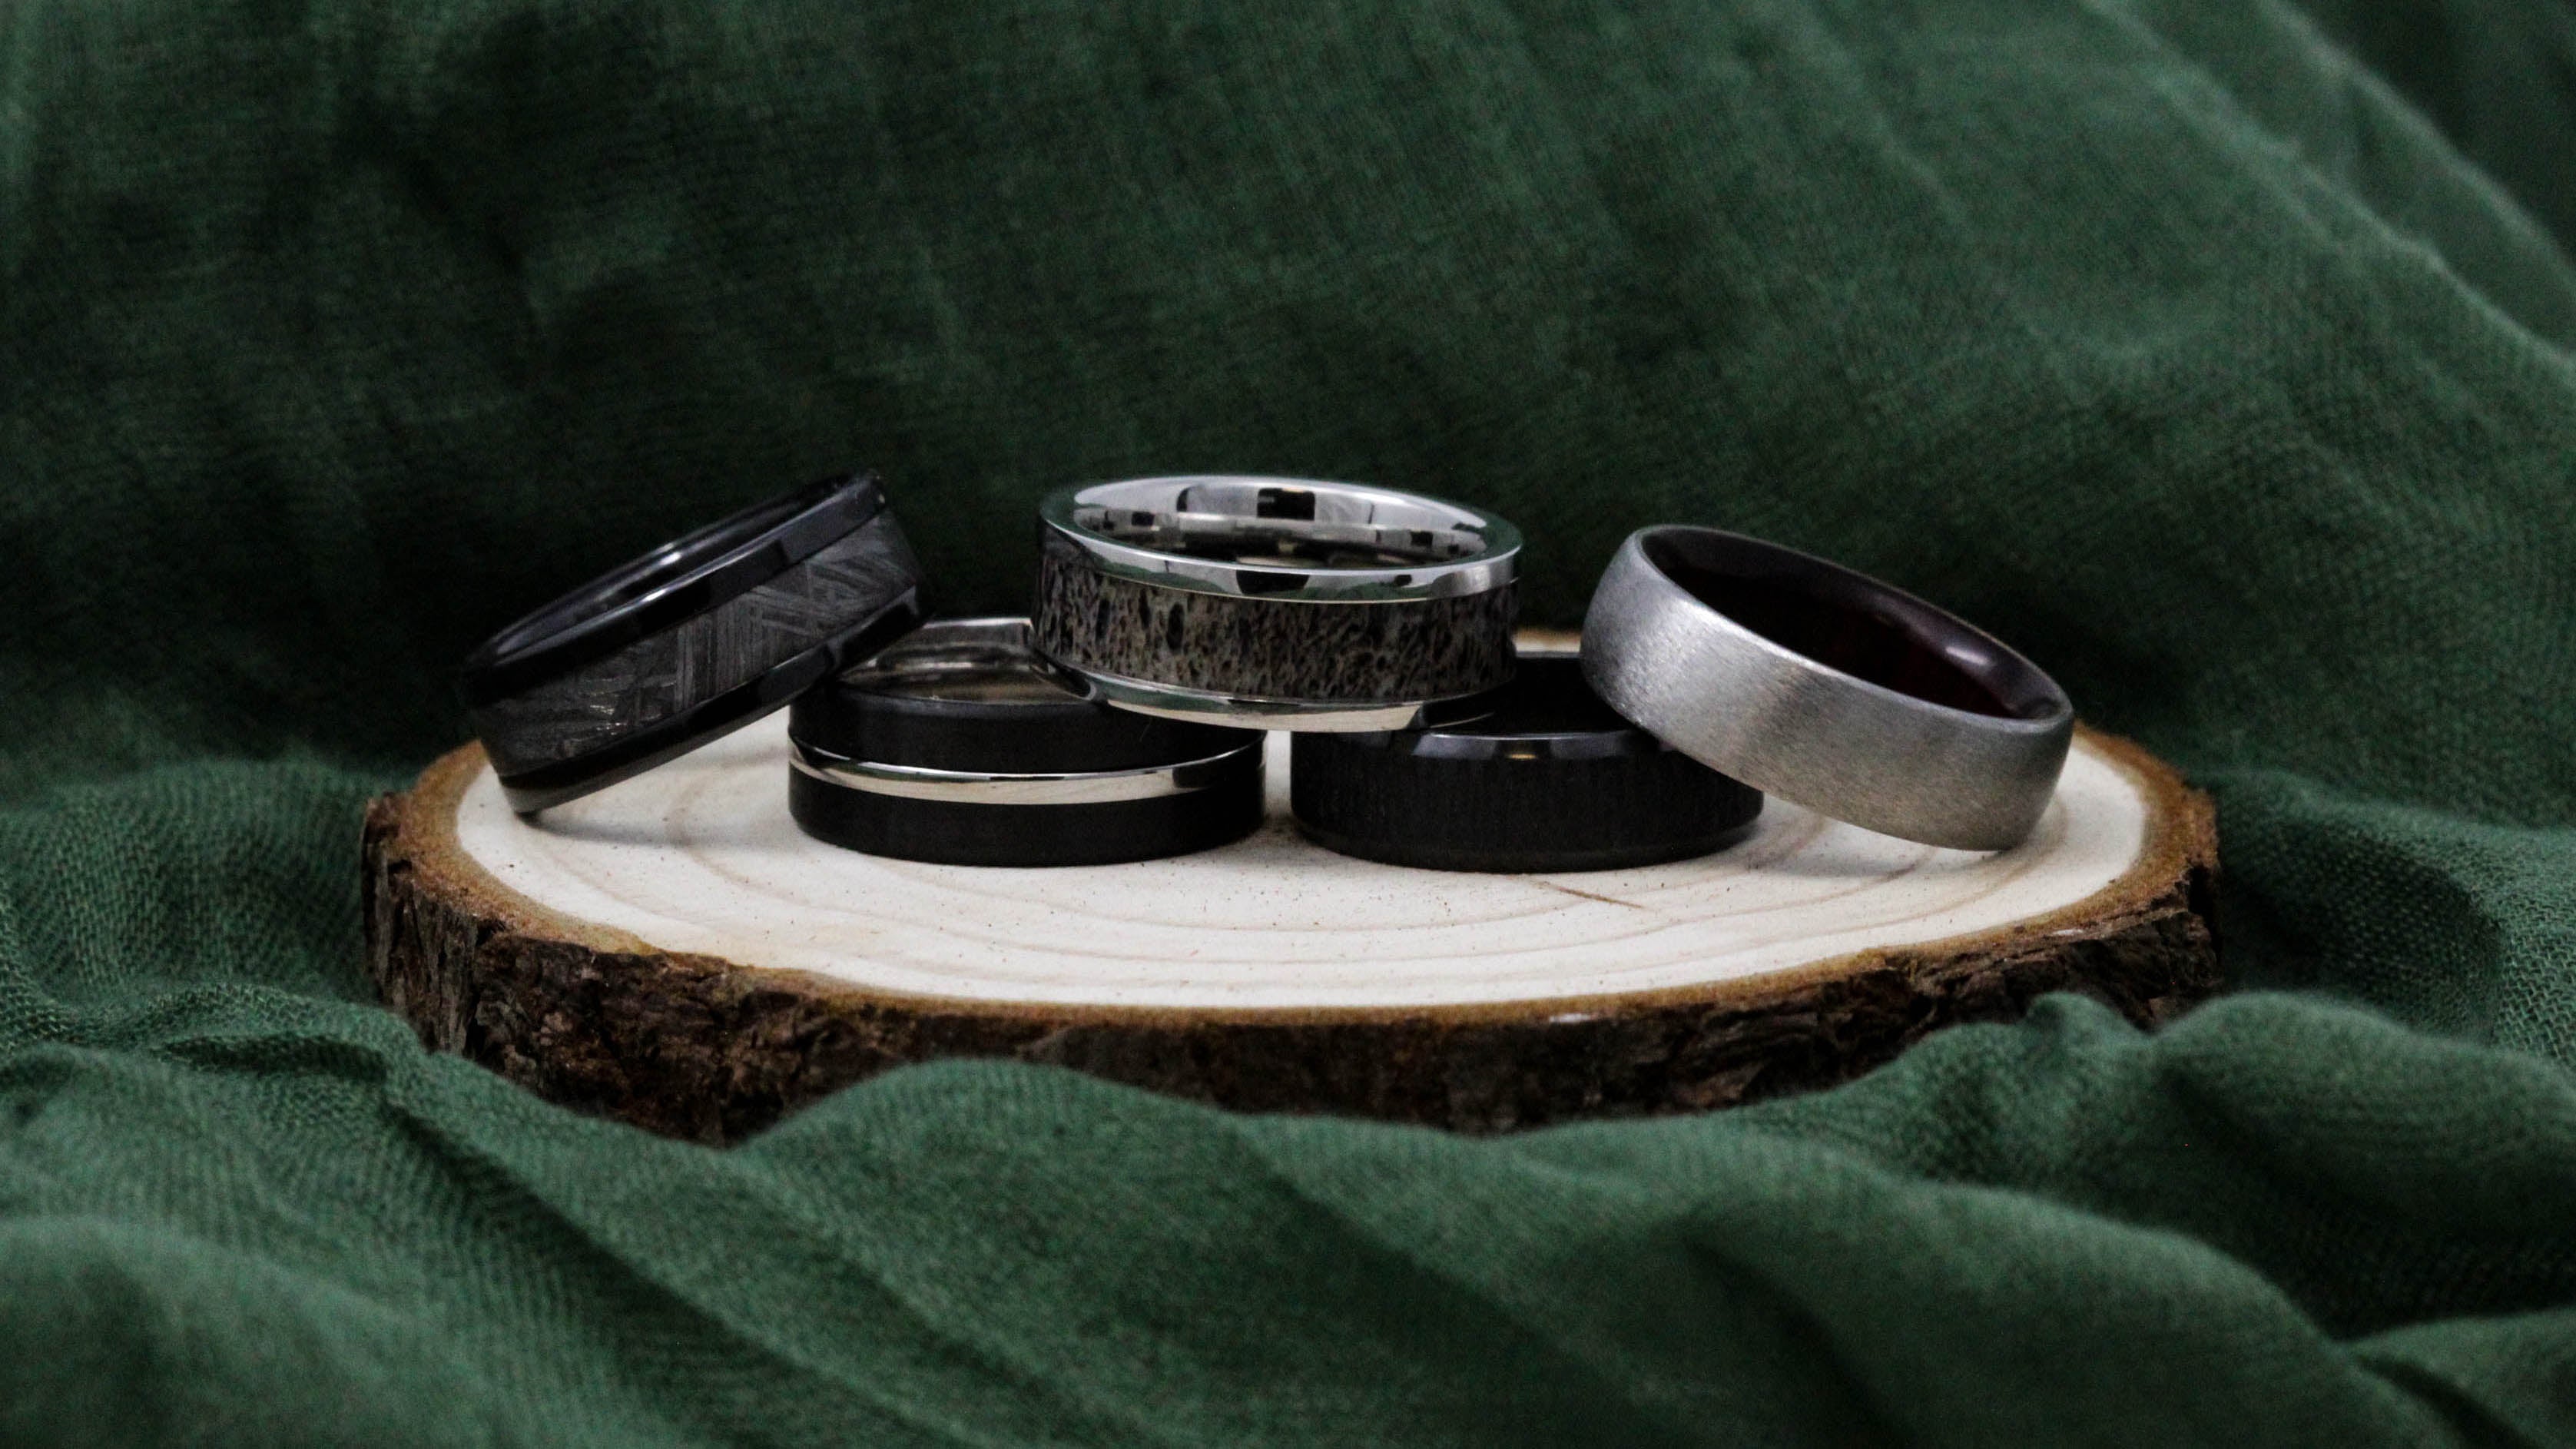 Black zirconium and cobalt chrome wedding bands with antler, meteorite, wood and sterling silver inlays.